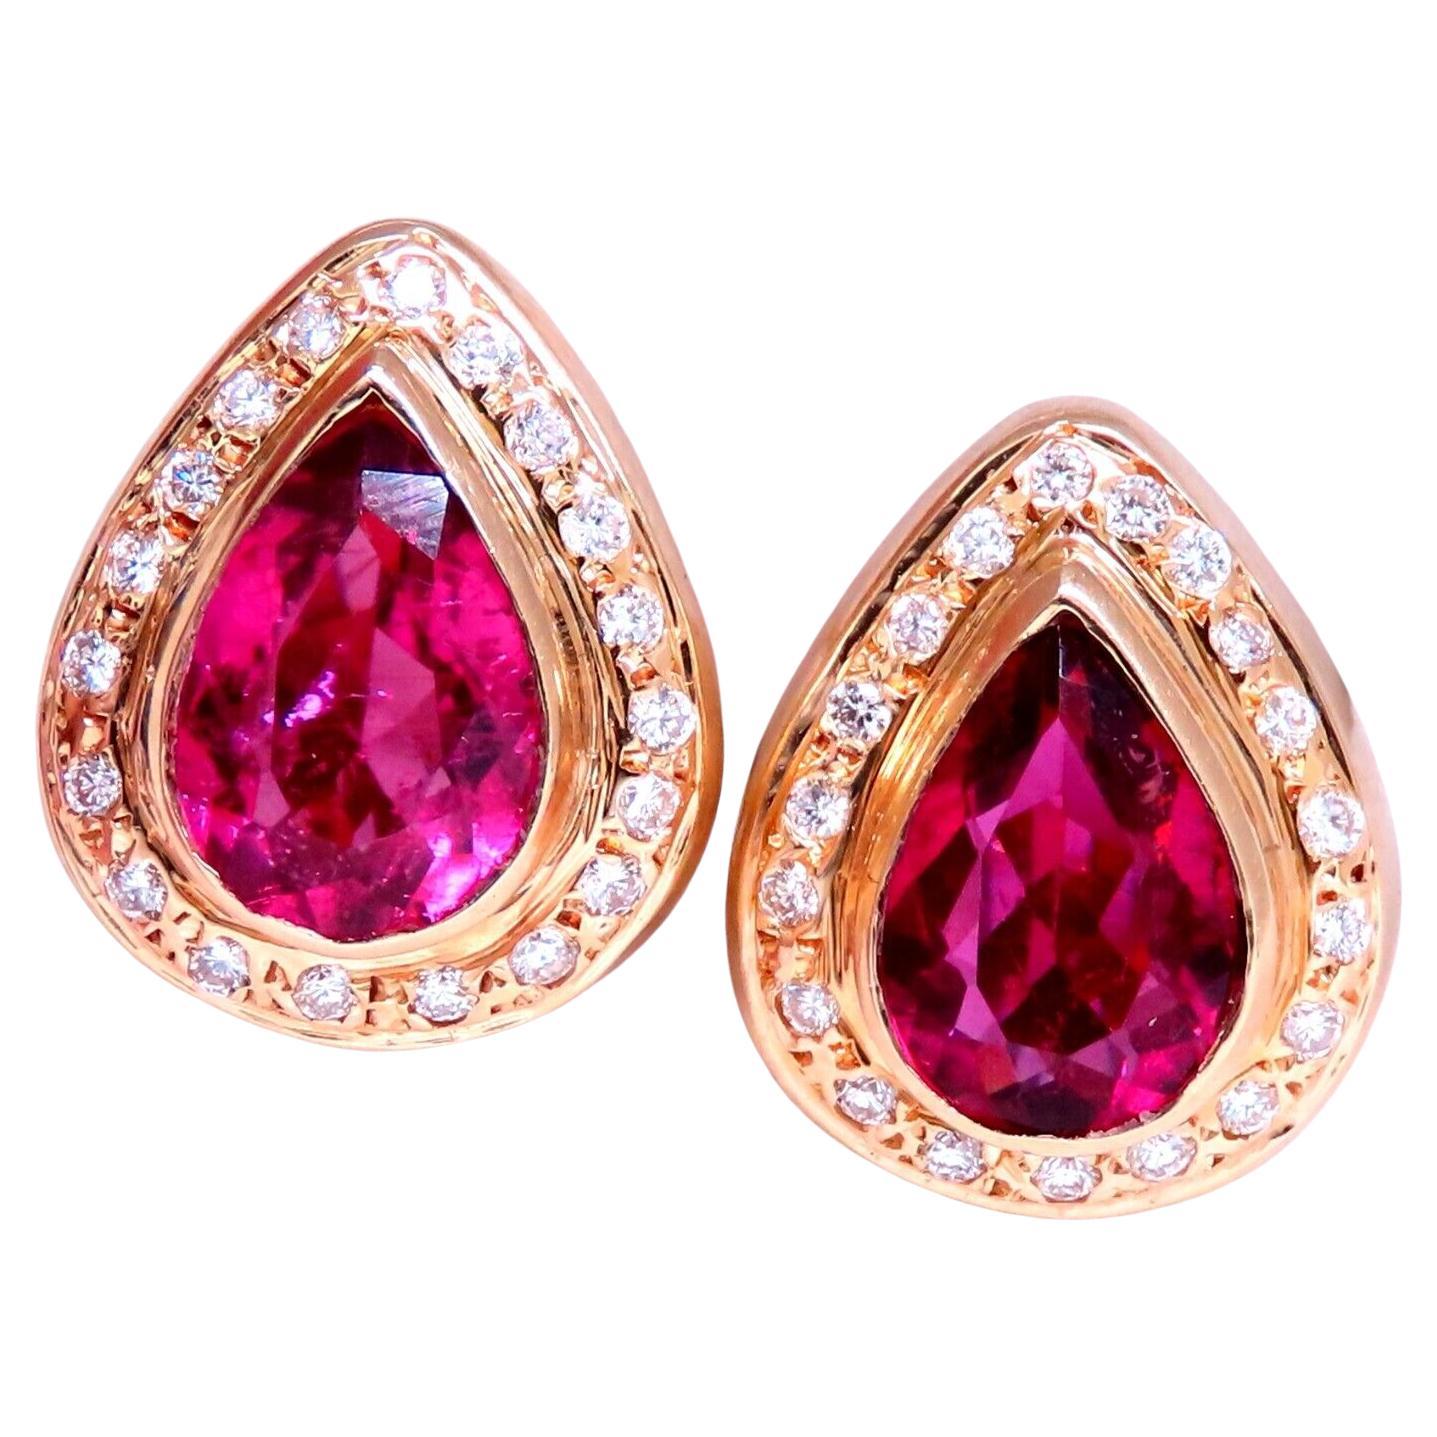 5.40ct Natural Pink Tourmaline Diamonds Earrings 14kt For Sale